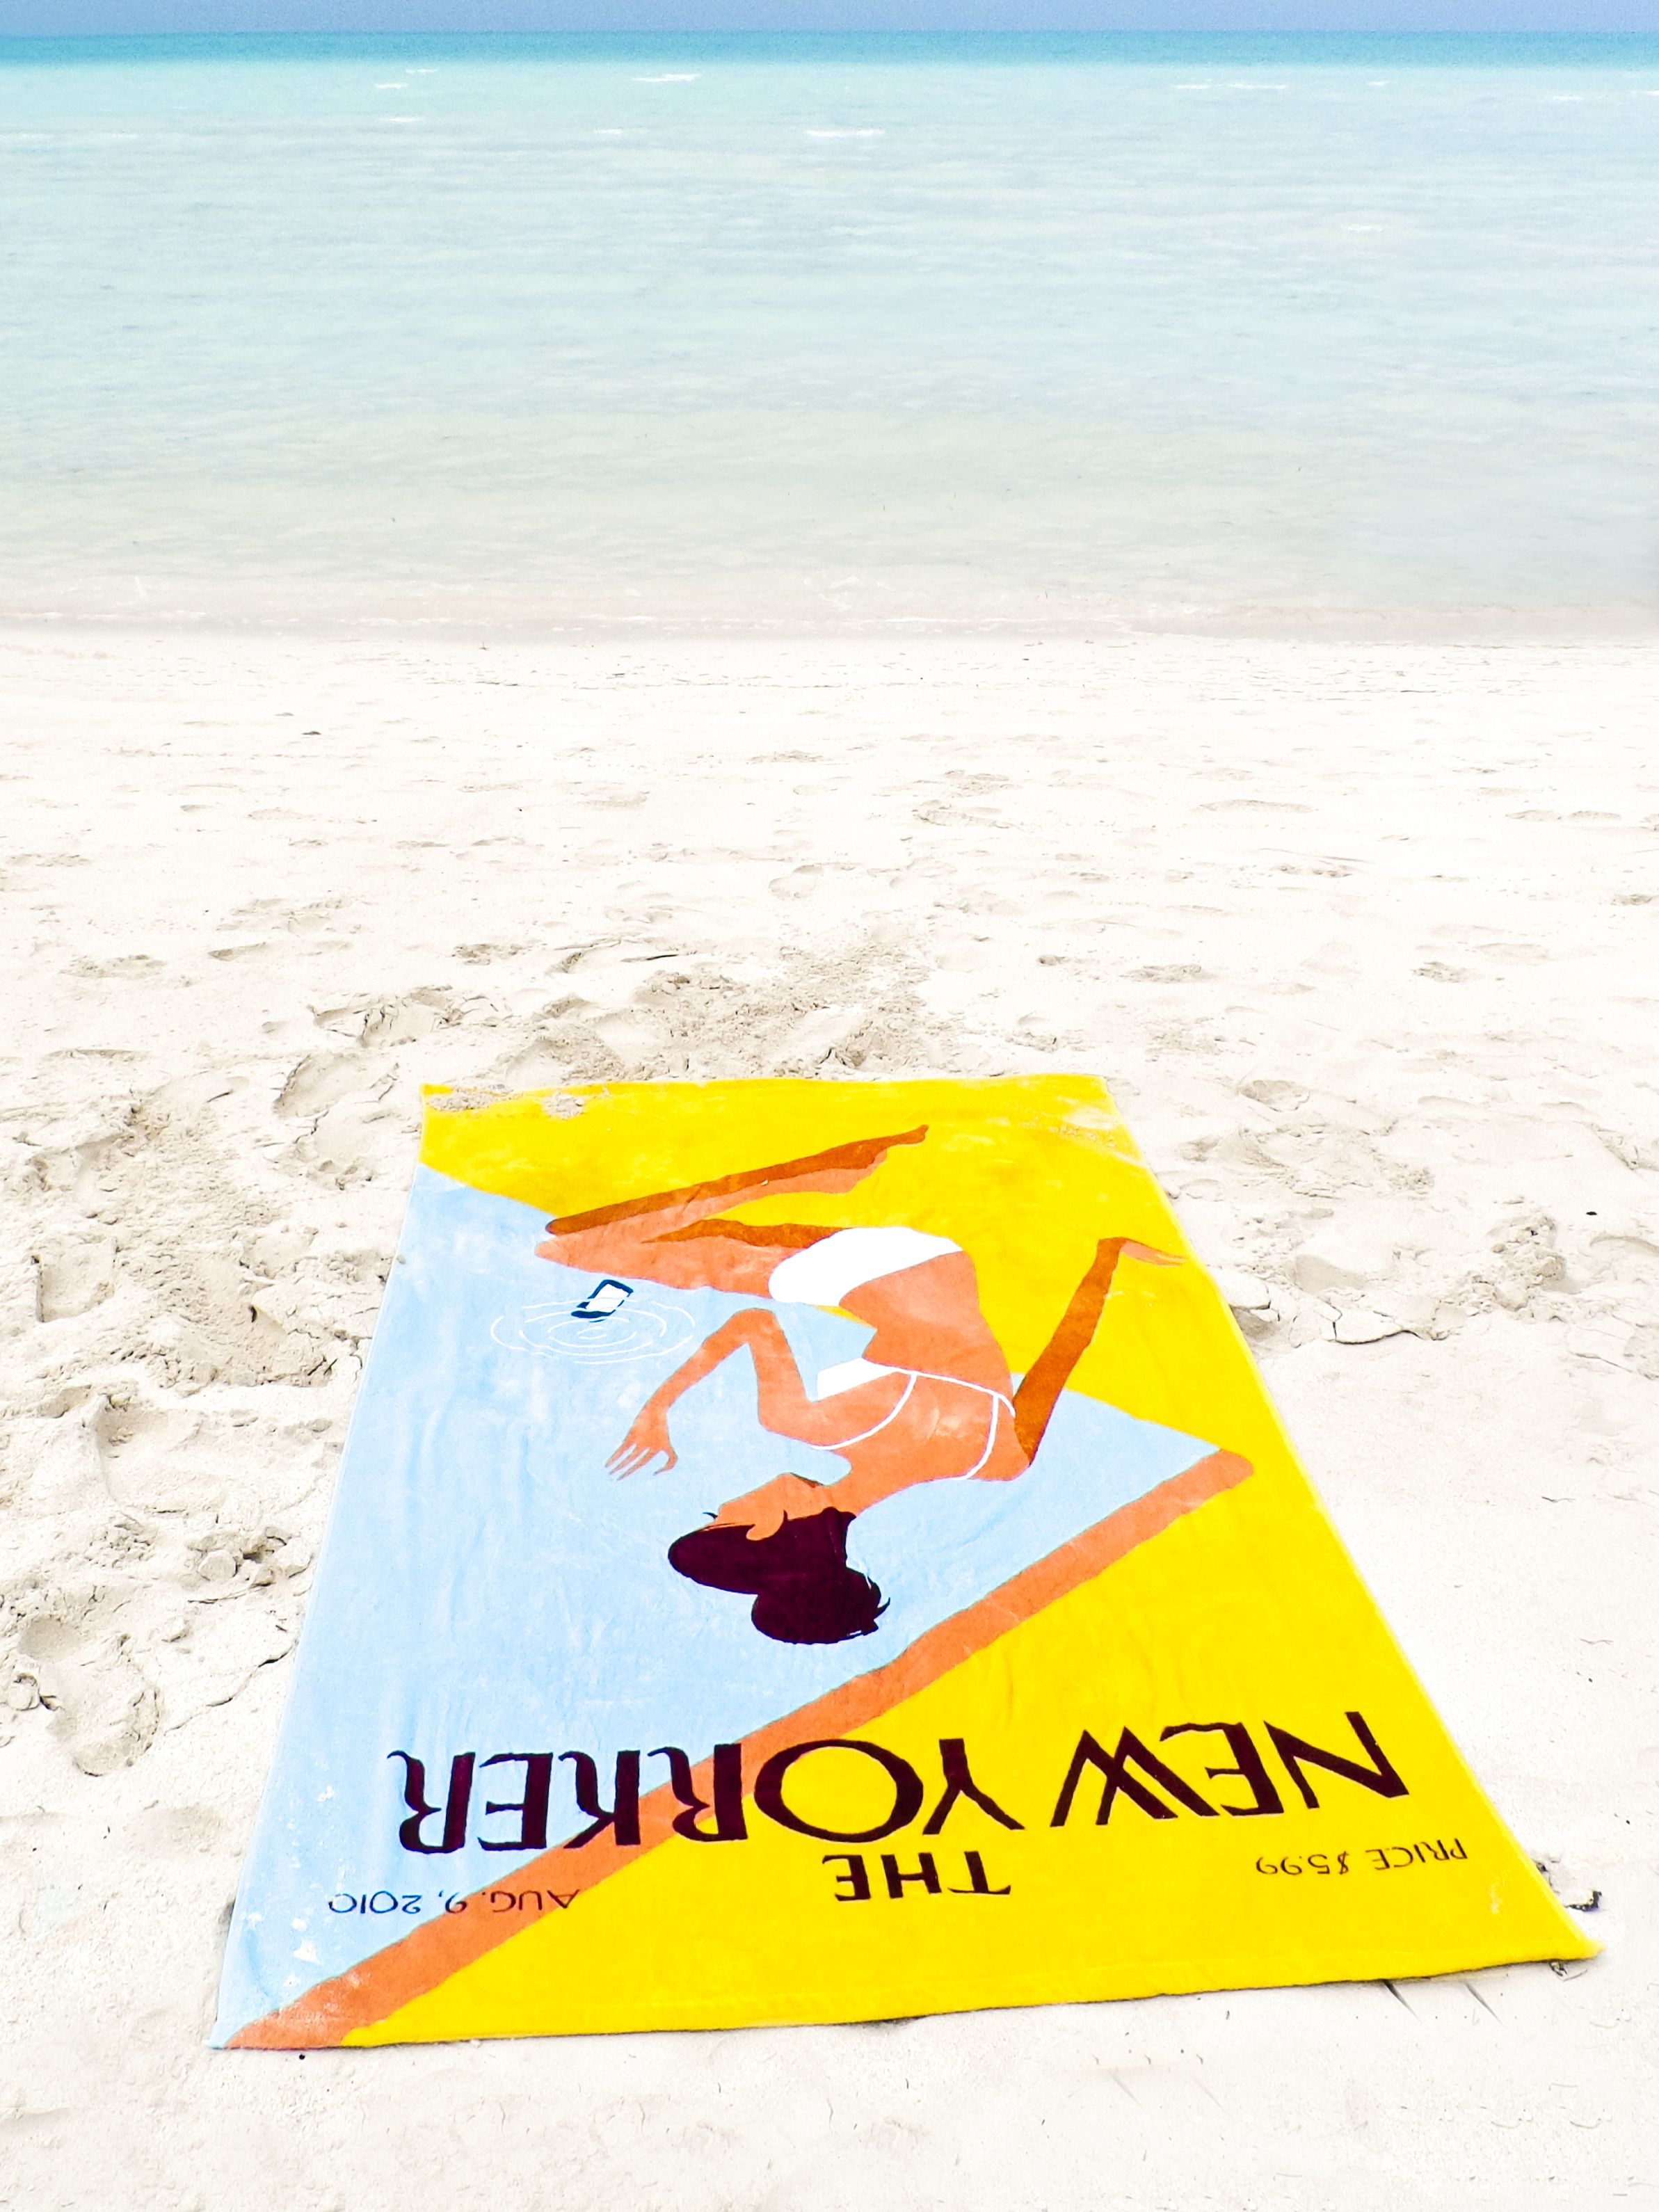 New Yorker Beach Towel in Providenciales Turks and Caicos